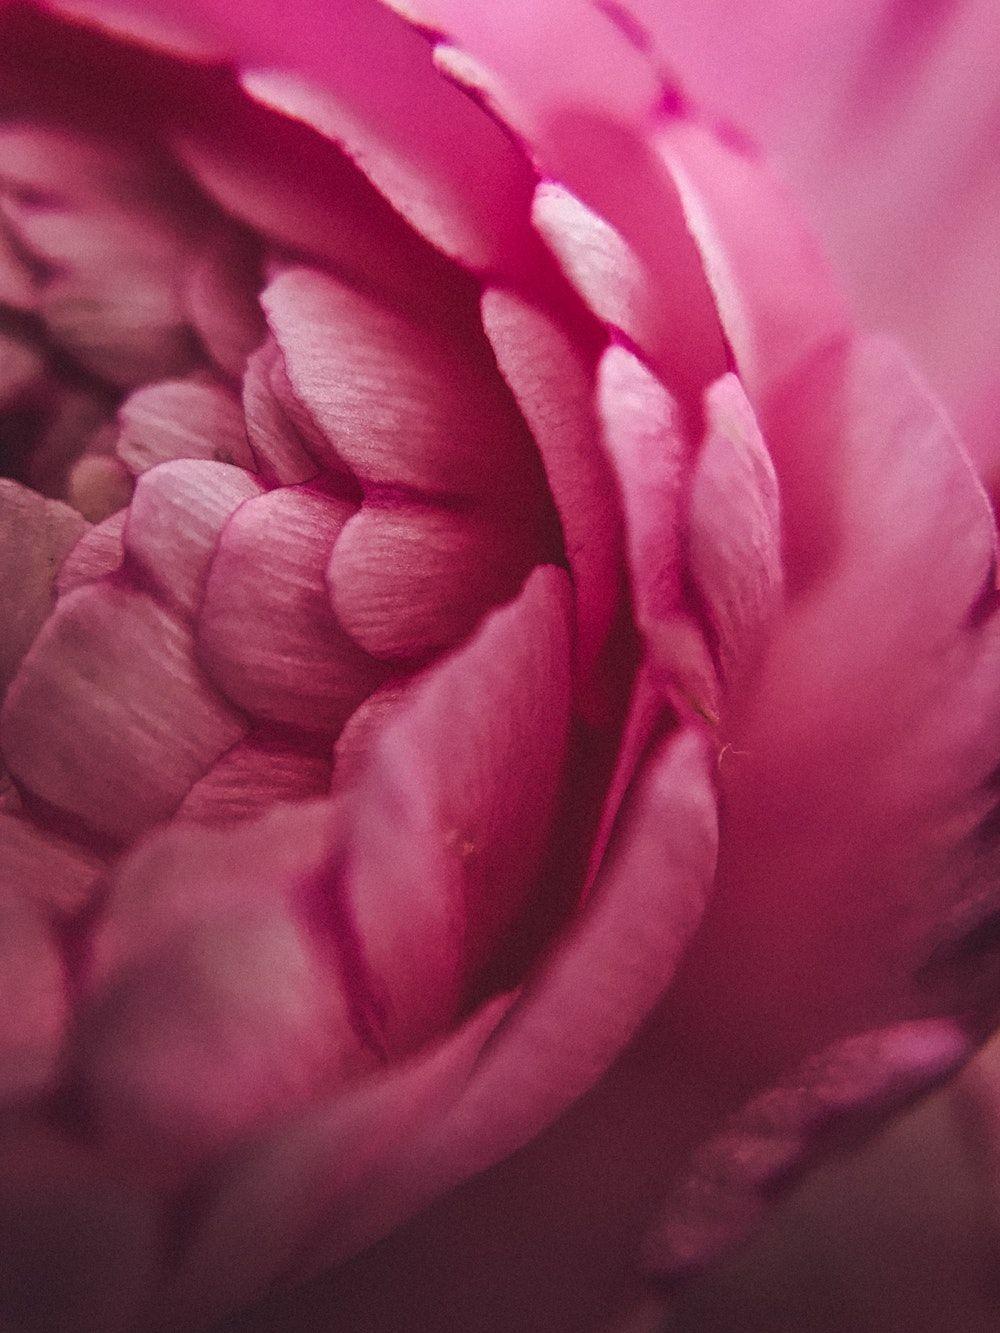 Macro Picture [HD]. Download Free Image